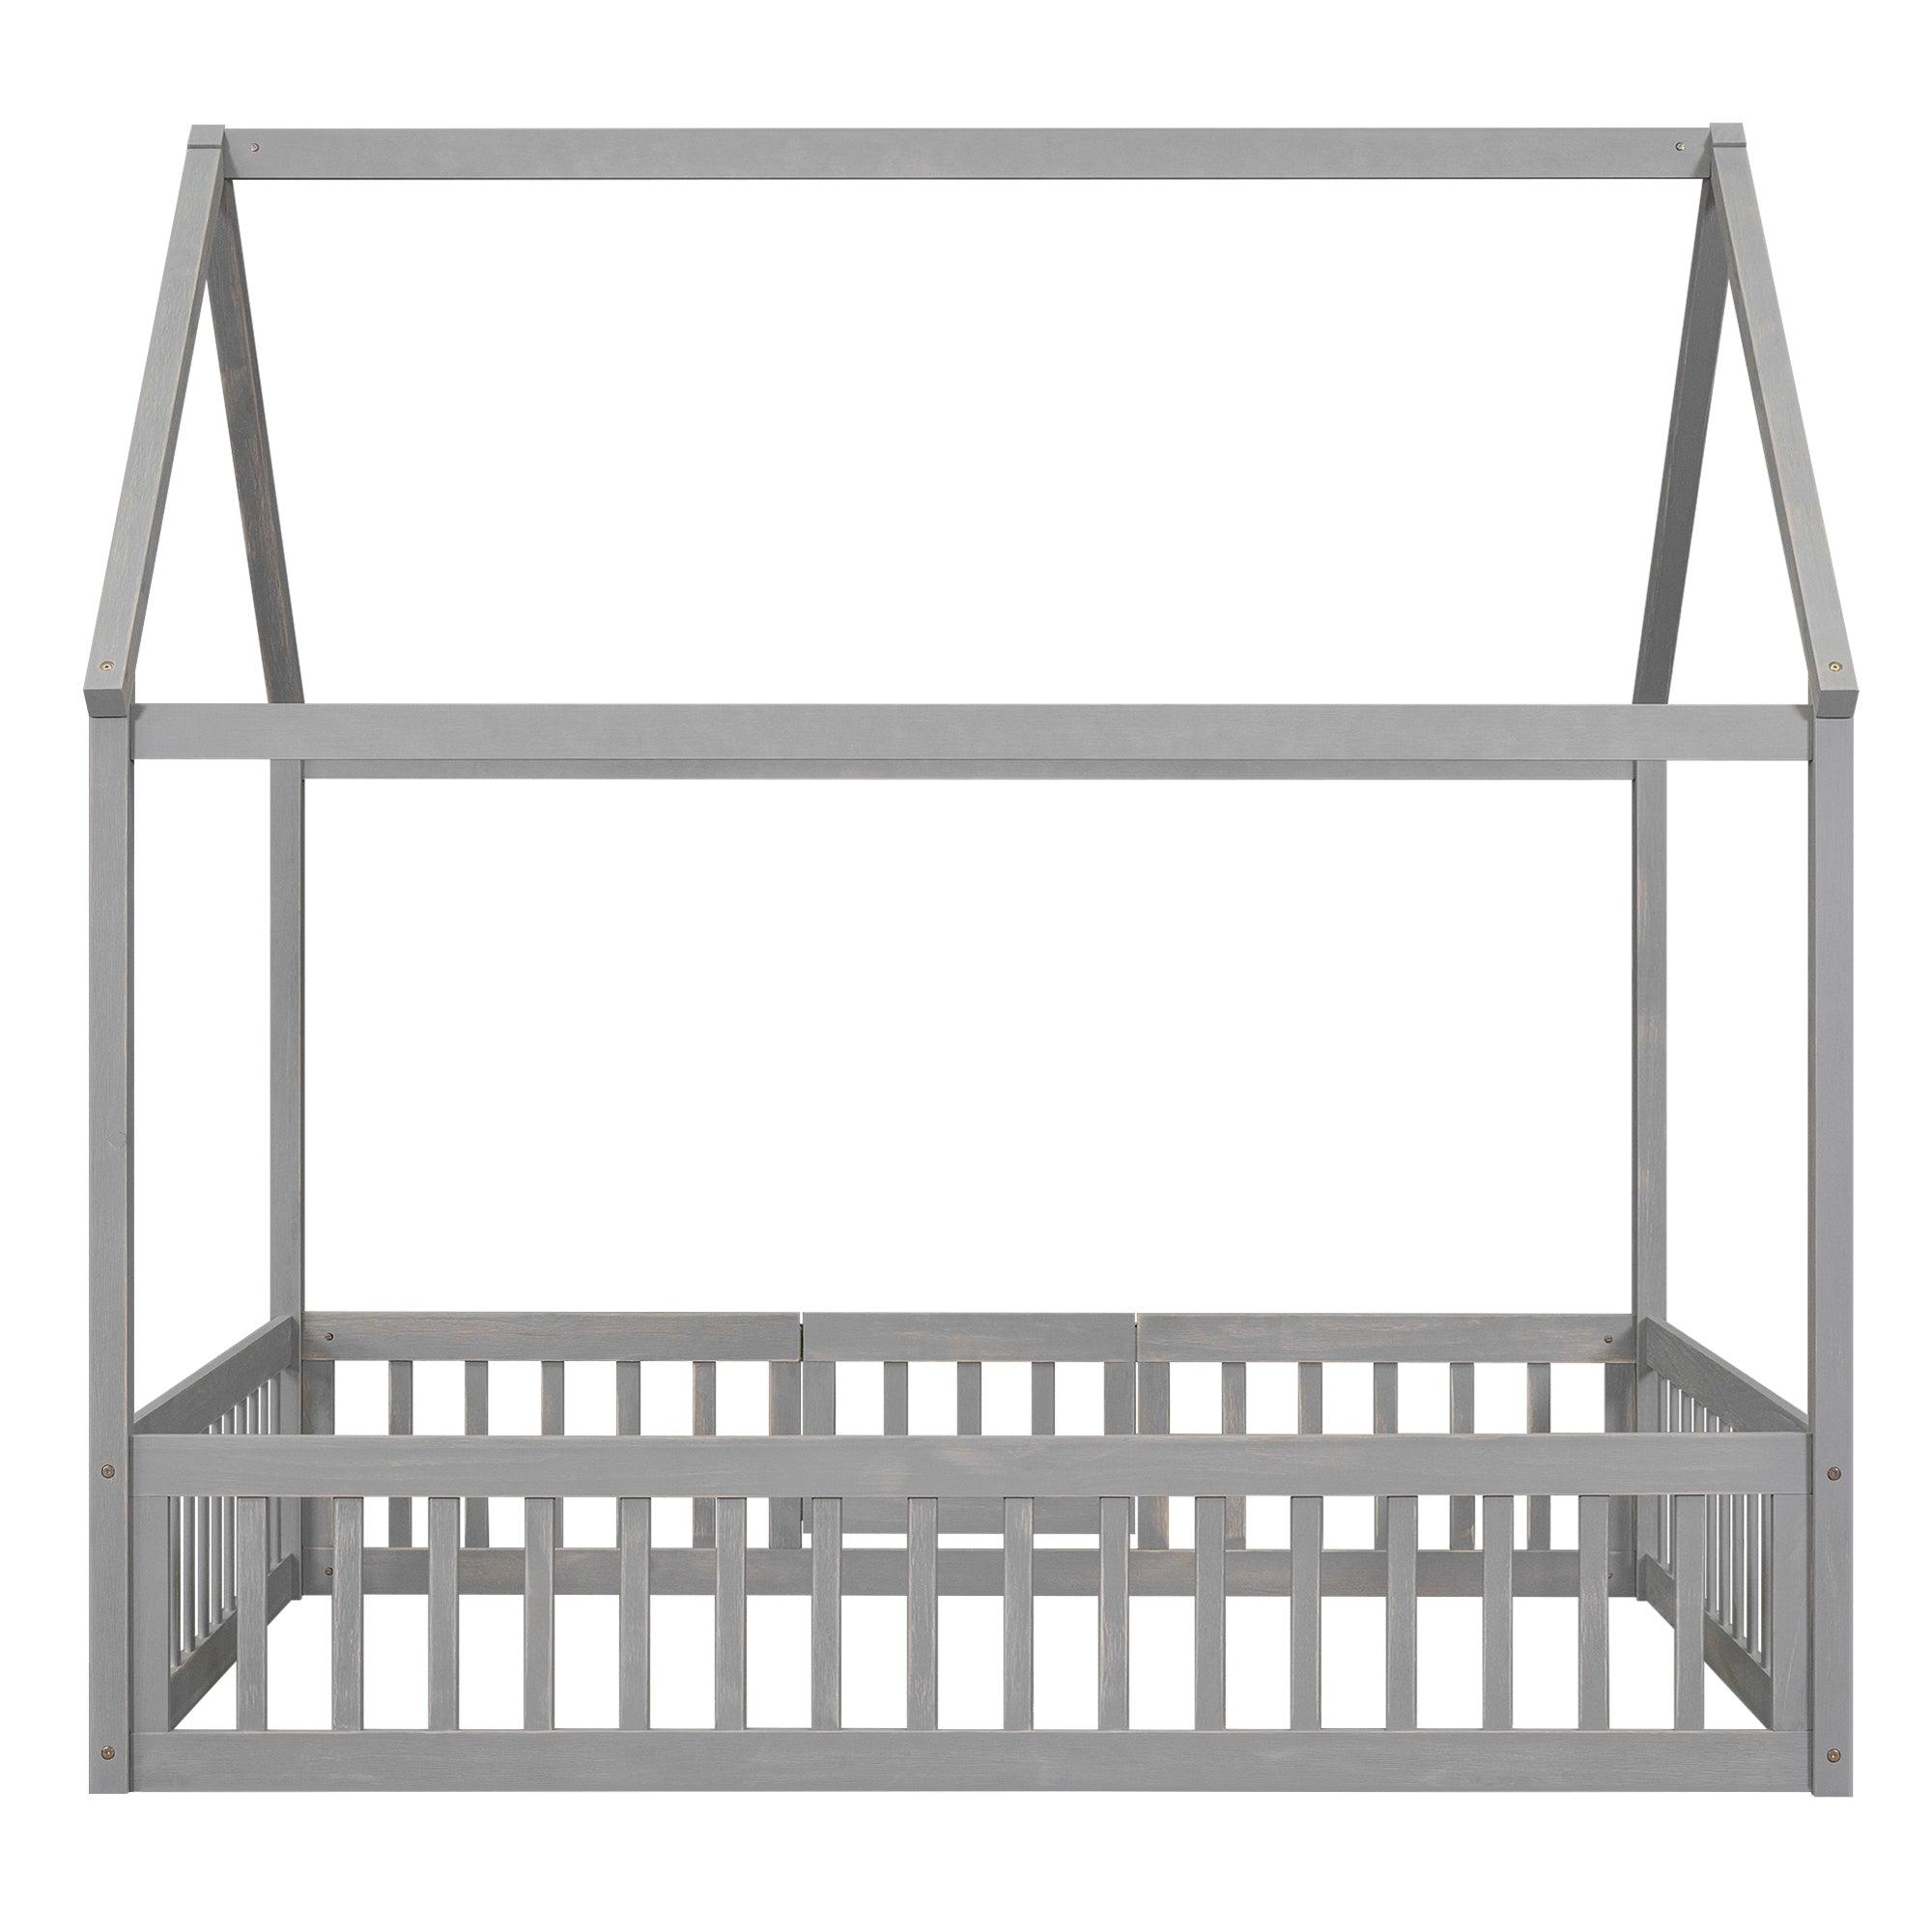 Full Size Wood House Bed With Fence And Door, Gray Wash